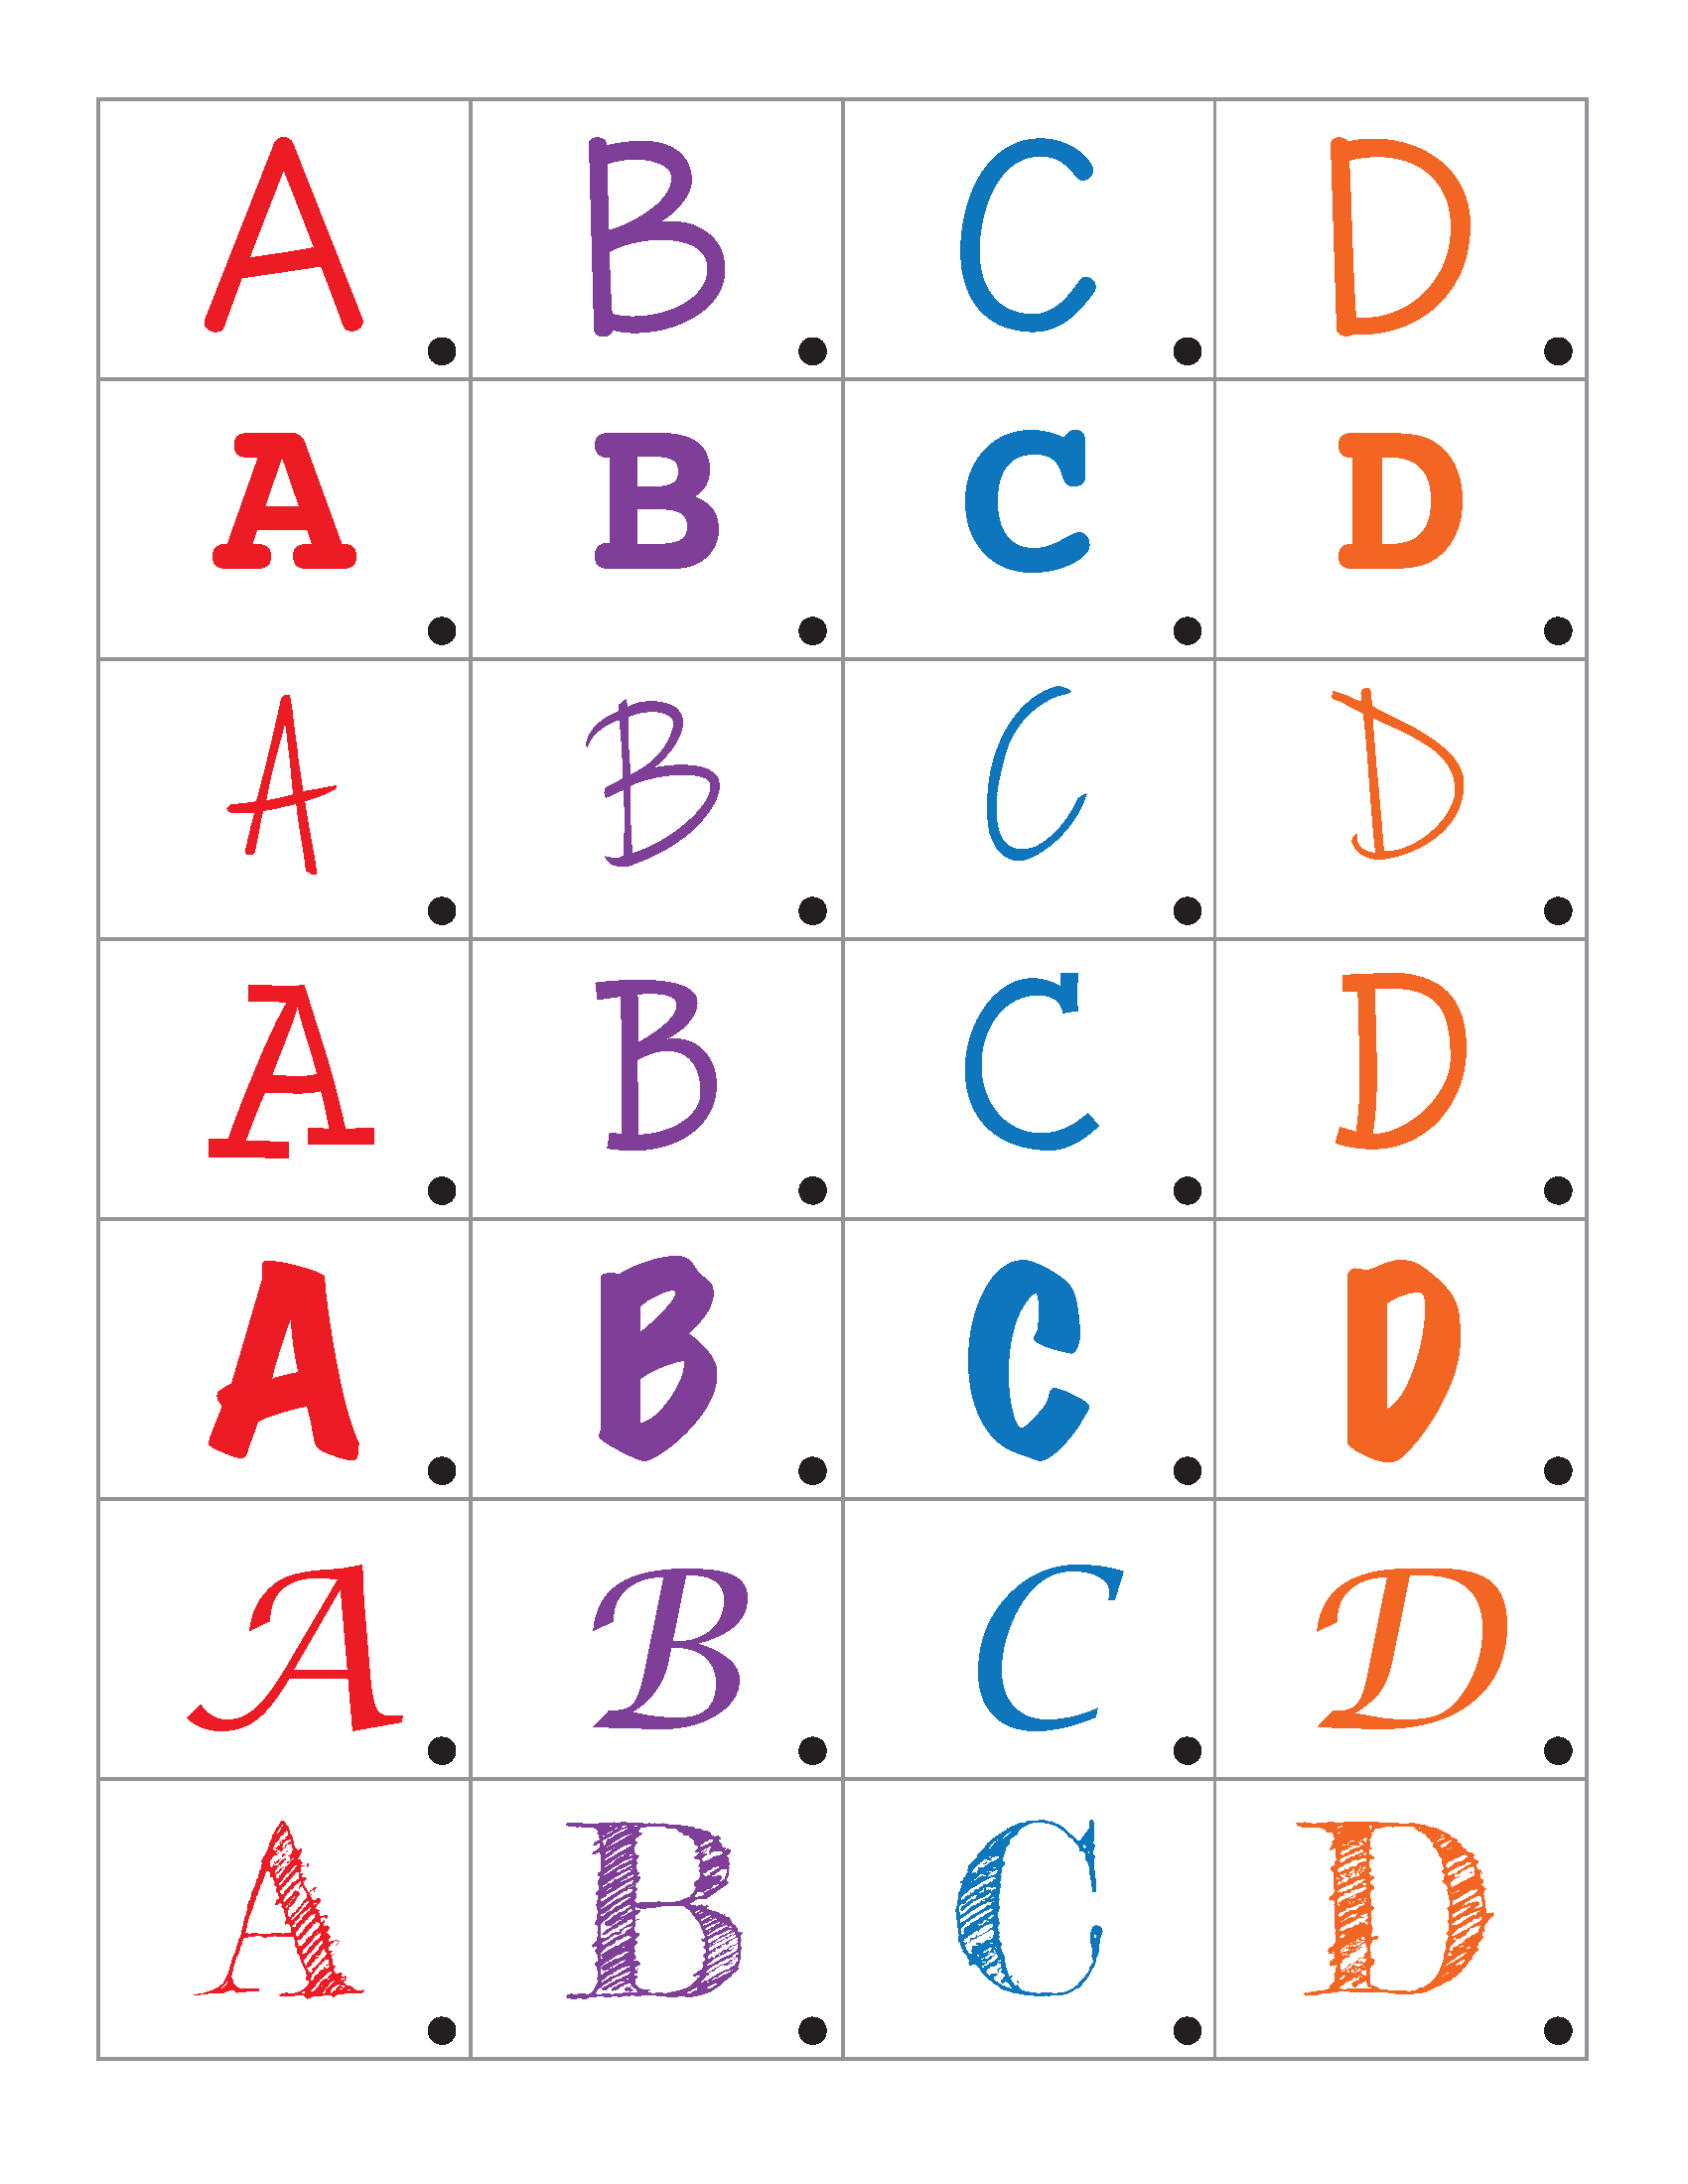 Funky Fonts Letter Sorting Activity With Free Printable {101 Ways - Printable Letters In Different Fonts